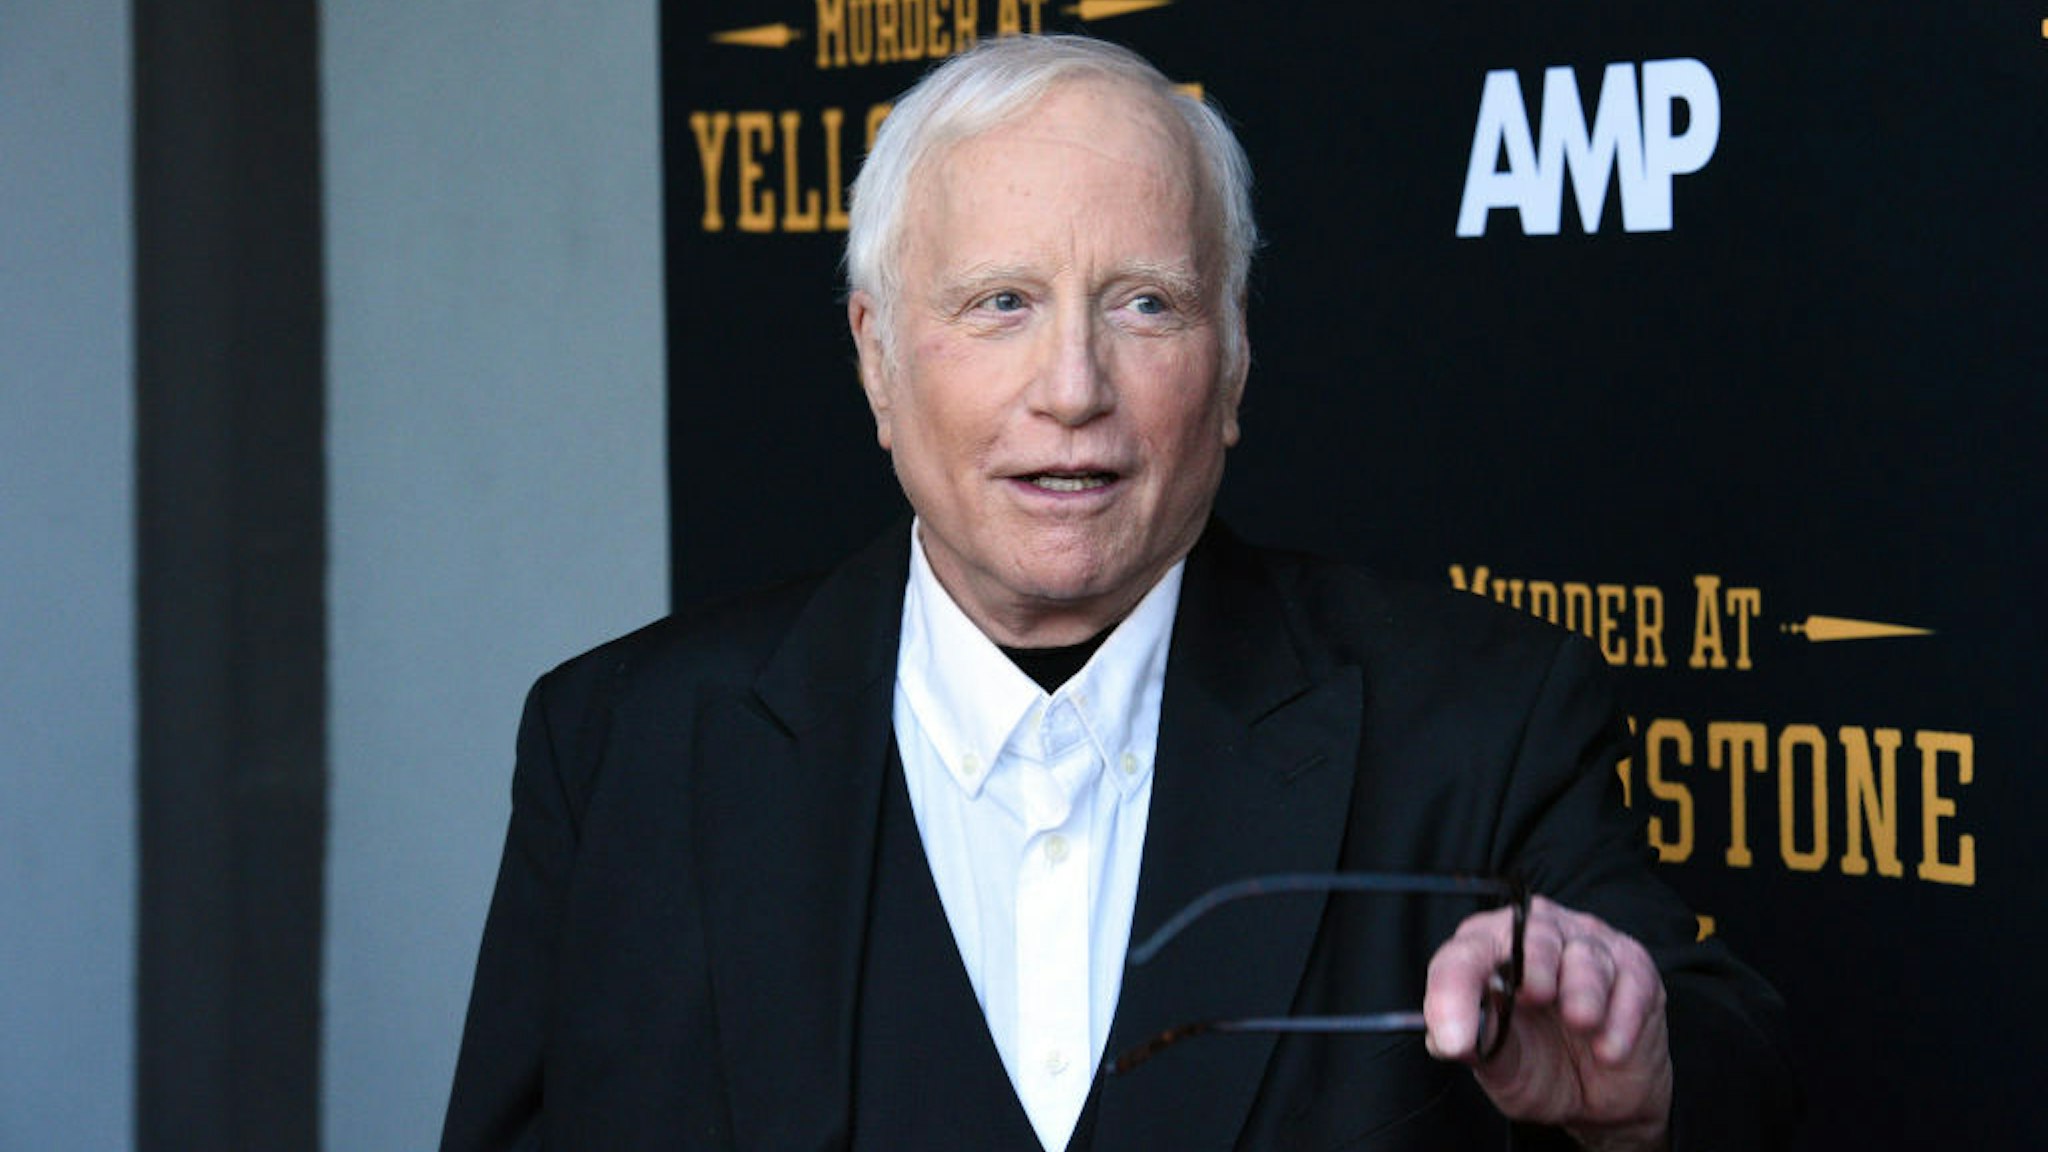 LOS ANGELES, CALIFORNIA - JUNE 23: Actor Richard Dreyfuss attends the premiere of "Murder At Yellowstone City" at Harmony Gold on June 23, 2022 in Los Angeles, California. (Photo by Michael Tullberg/Getty Images)